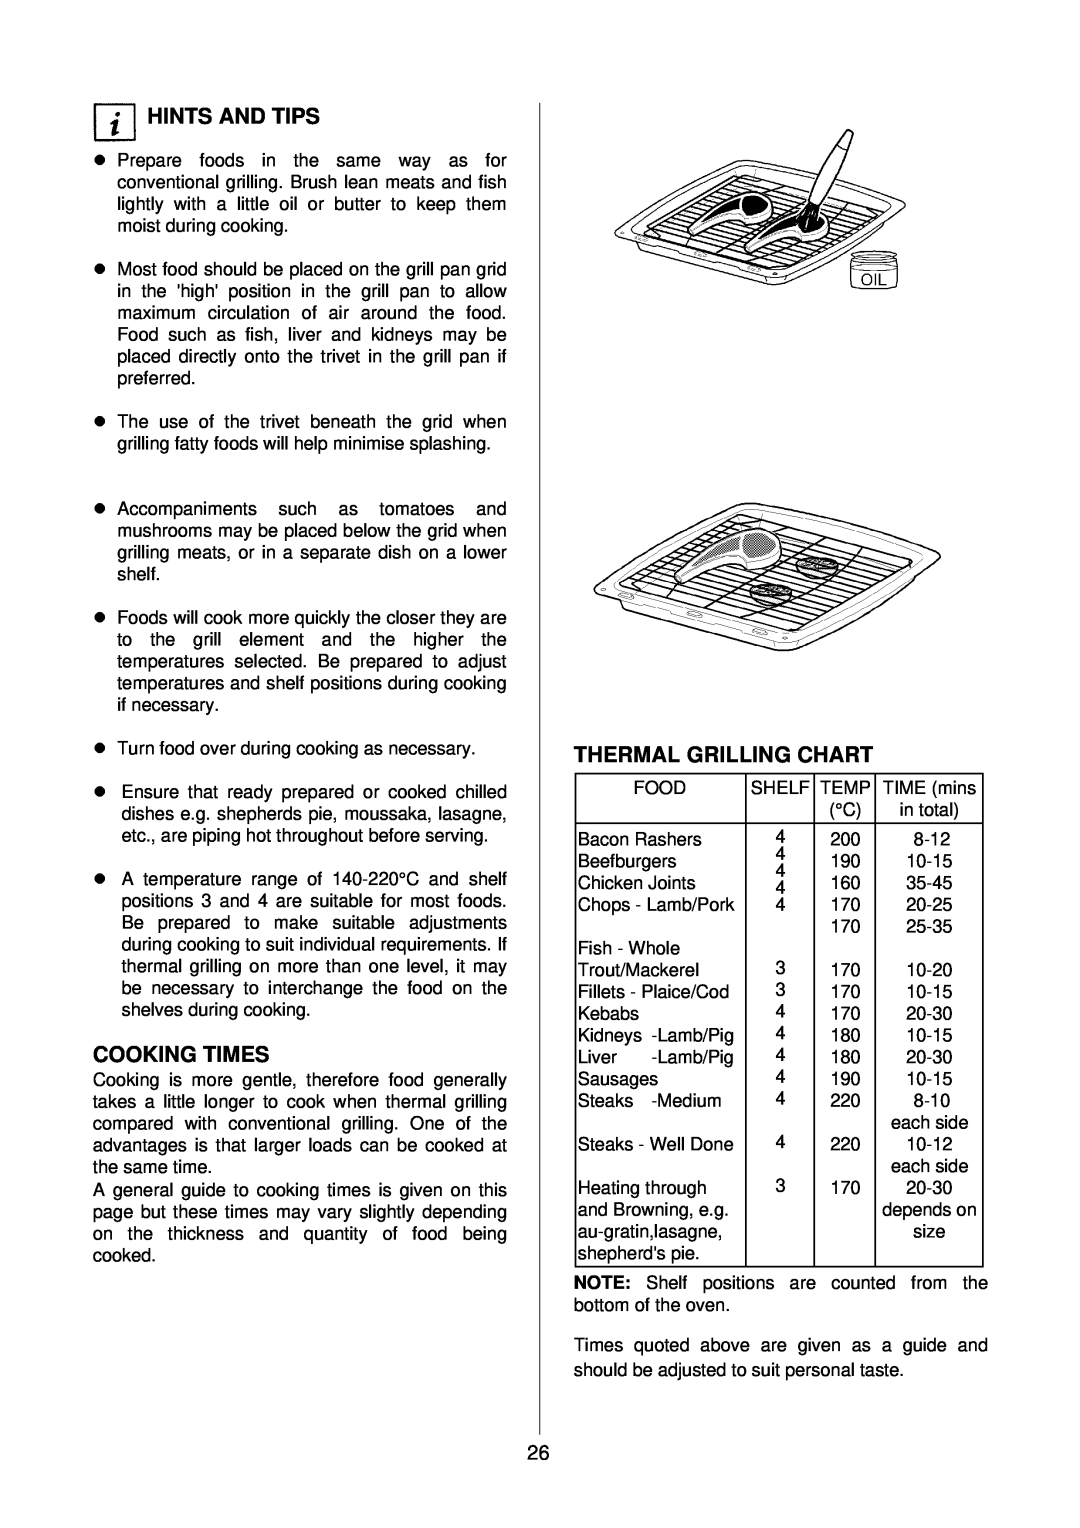 AEG D4100-1 manual Thermal Grilling Chart, Hints And Tips, Cooking Times 